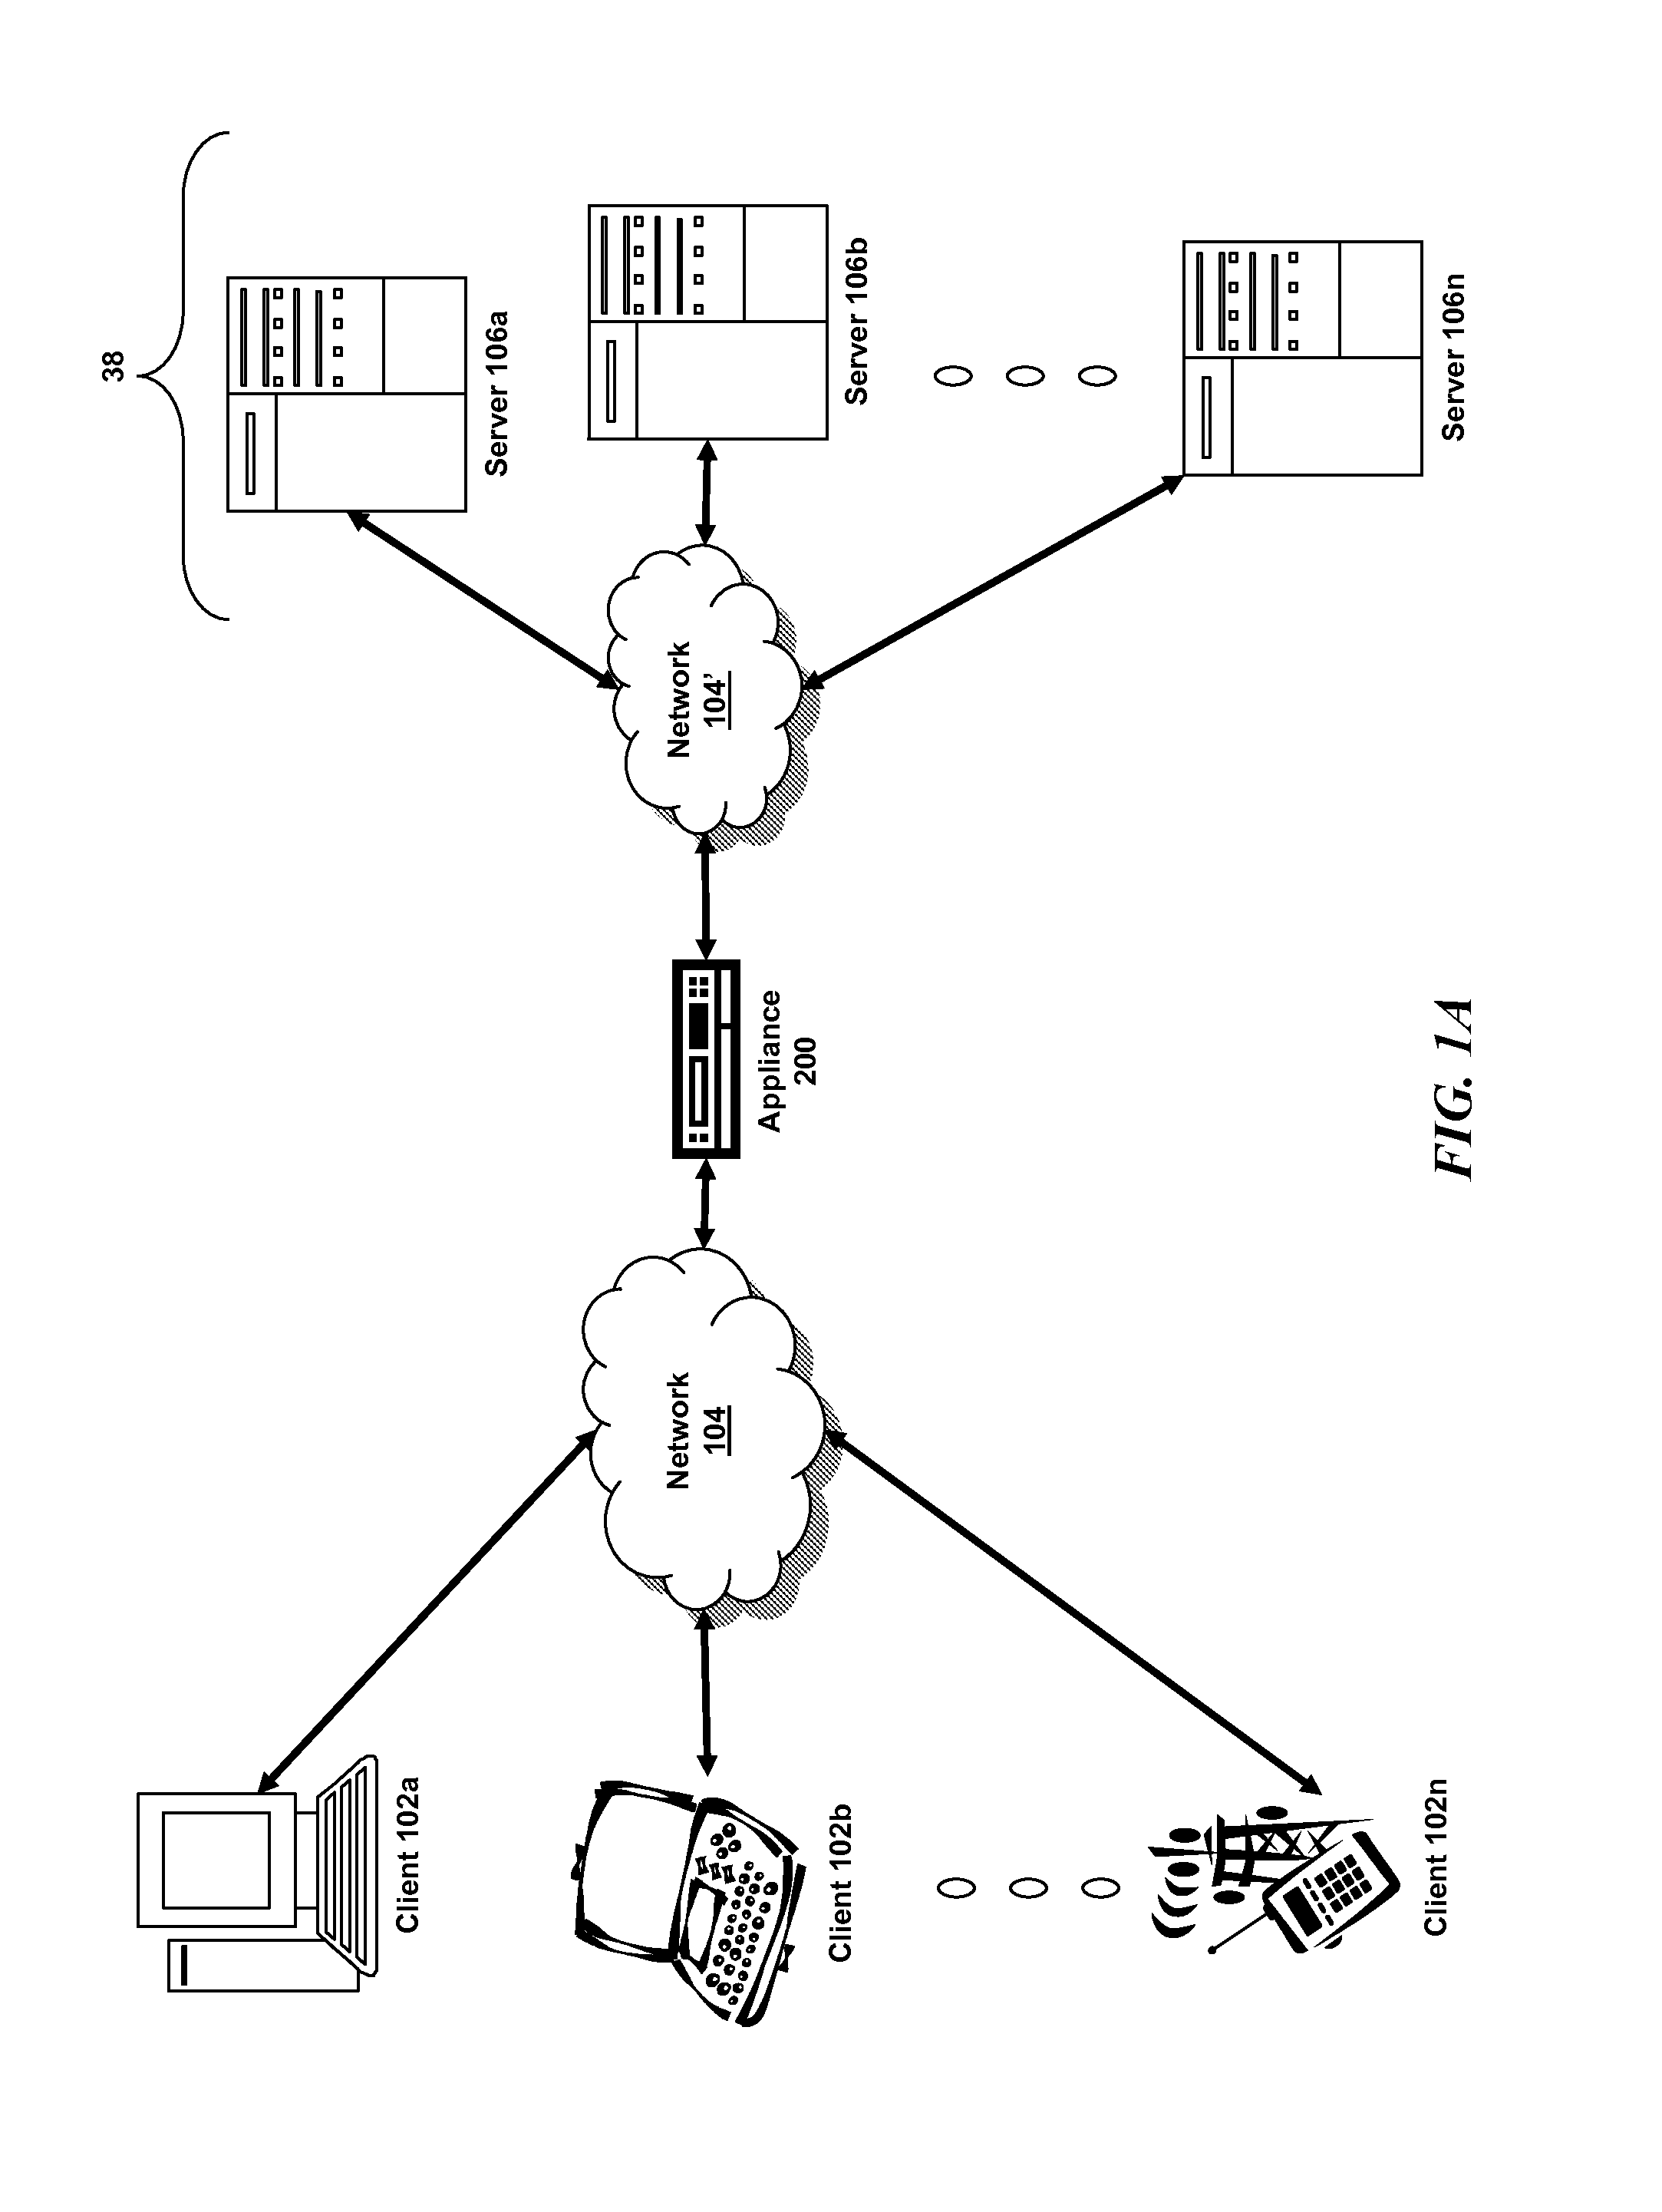 Systems and methods for retaining source IP in a load balancing multi-core environment